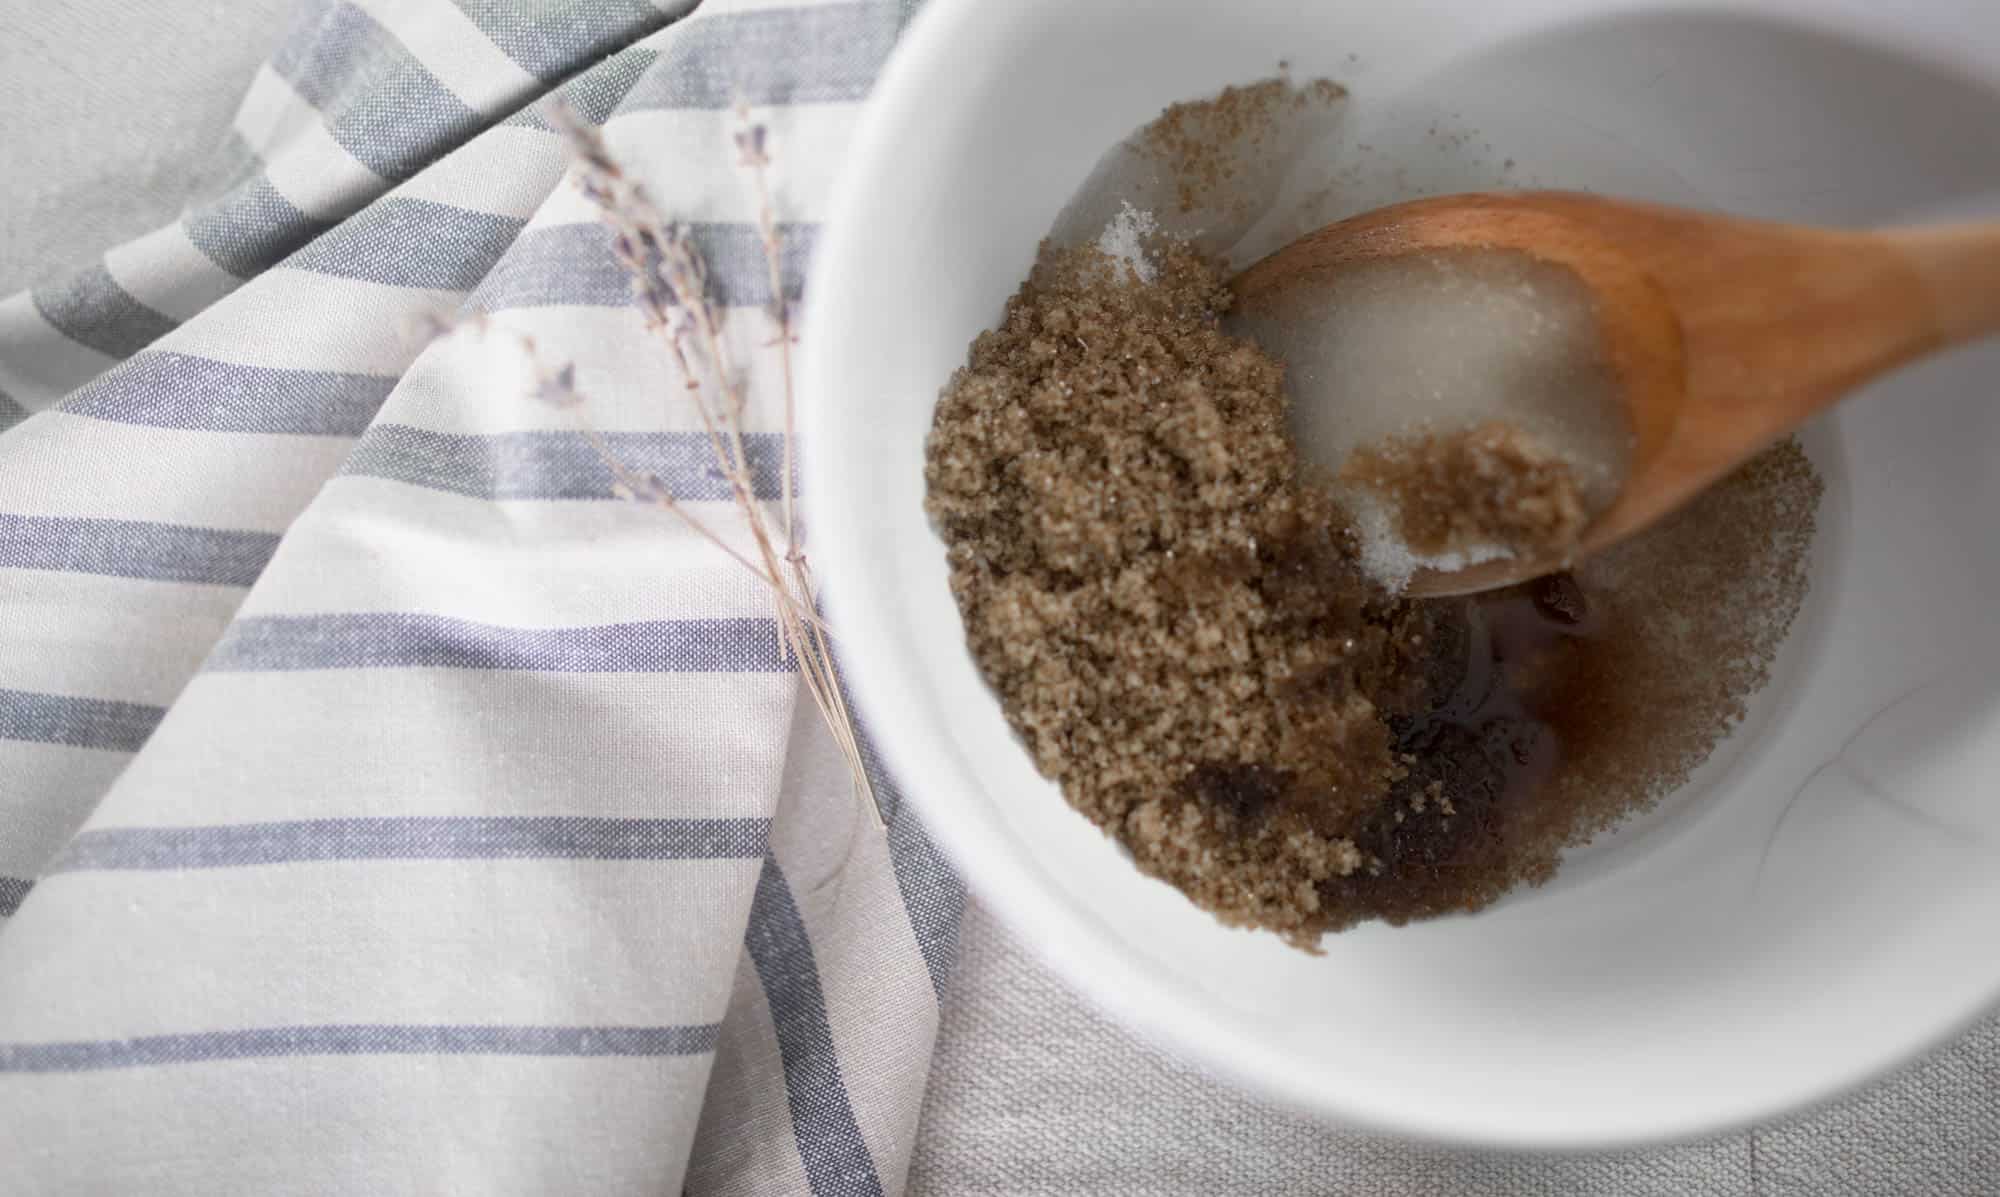 How to Make Homemade Sugar Scrub with Healthy Natural Ingredients